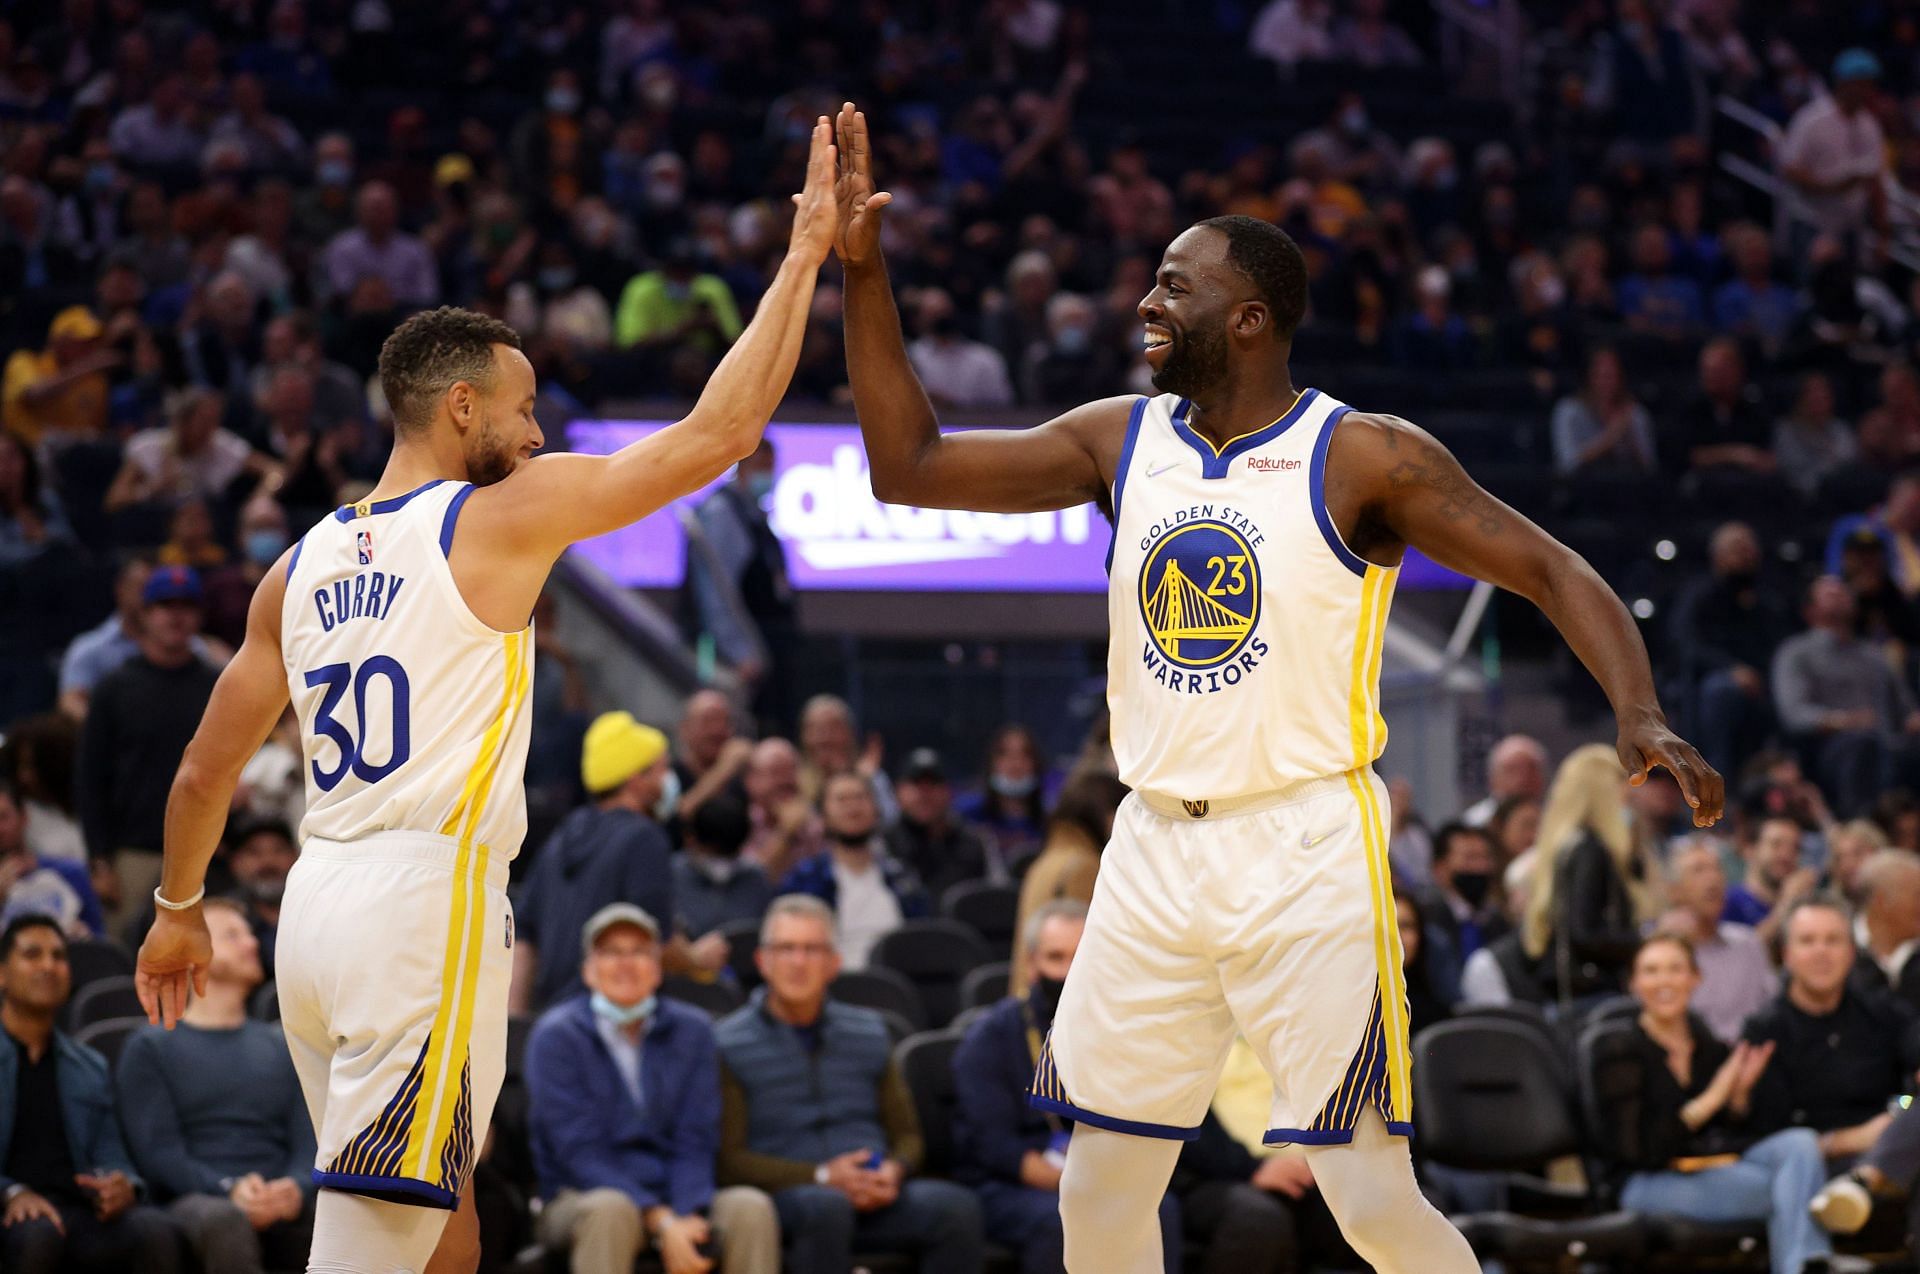 Draymond Green and Stephen Curry of the Golden State Warriors high-five each other during the first half of their game against the Memphis Grizzlies at Chase Center on Oct. 28 in San Francisco.